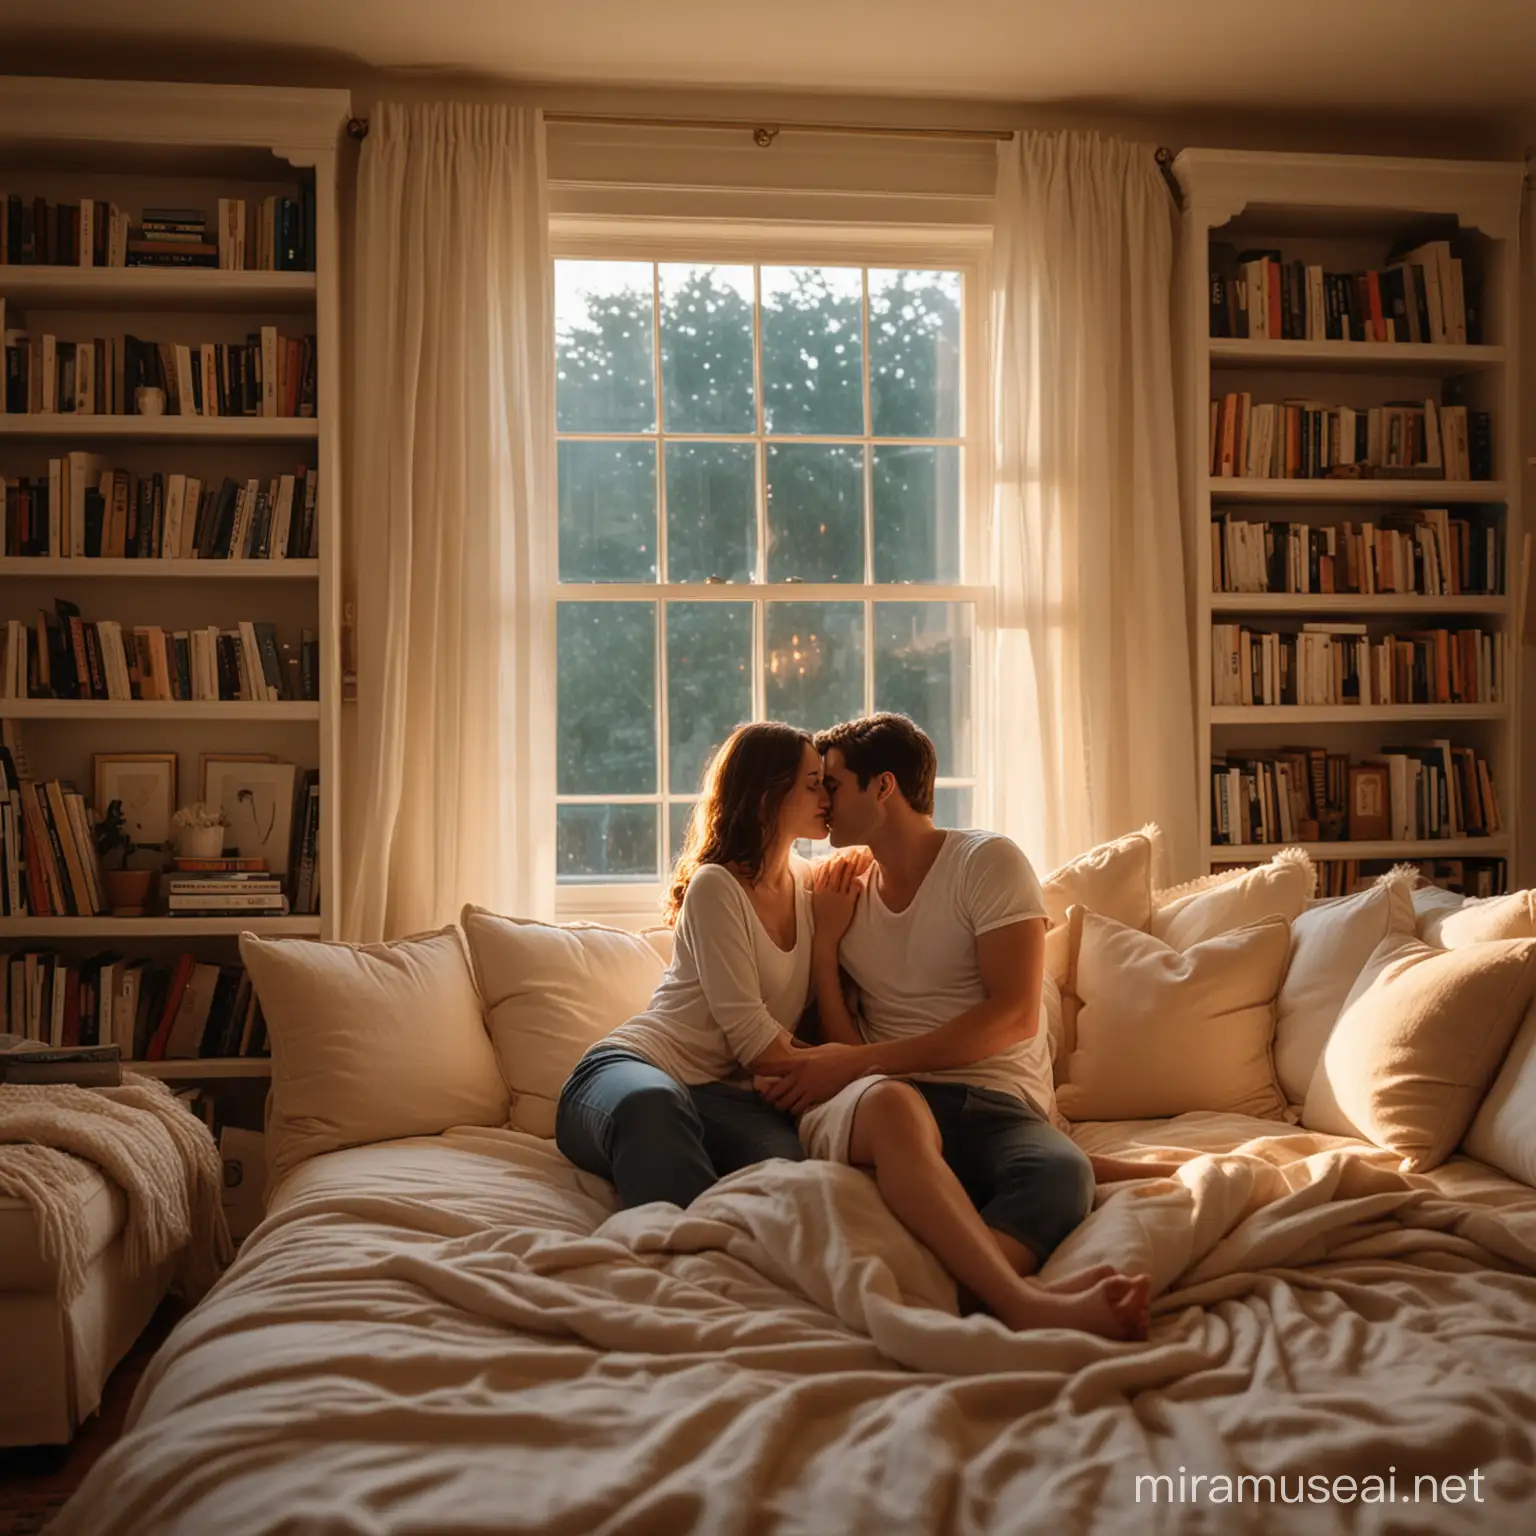 A photorealistic image capturing a tender and intimate moment between a loving couple. The scene is set in a cozy, warmly lit living room at dusk, with soft lights casting a gentle glow over the space. They are seated close together on a plush, oversized couch, surrounded by an array of soft pillows. The couple is engaged in a quiet, loving conversation, sharing a light, joyous laugh. Their affection for each other is evident in their close proximity and the way they gaze into each other's eyes, smiles gently playing on their lips. The room is tastefully decorated to reflect a comfortable, lived-in feel, with bookshelves filled with books, a soft, luxurious rug underfoot, and large windows that frame the setting sun. The atmosphere is one of warmth, love, and comfort, inviting the viewer into this moment of shared affection and connection.